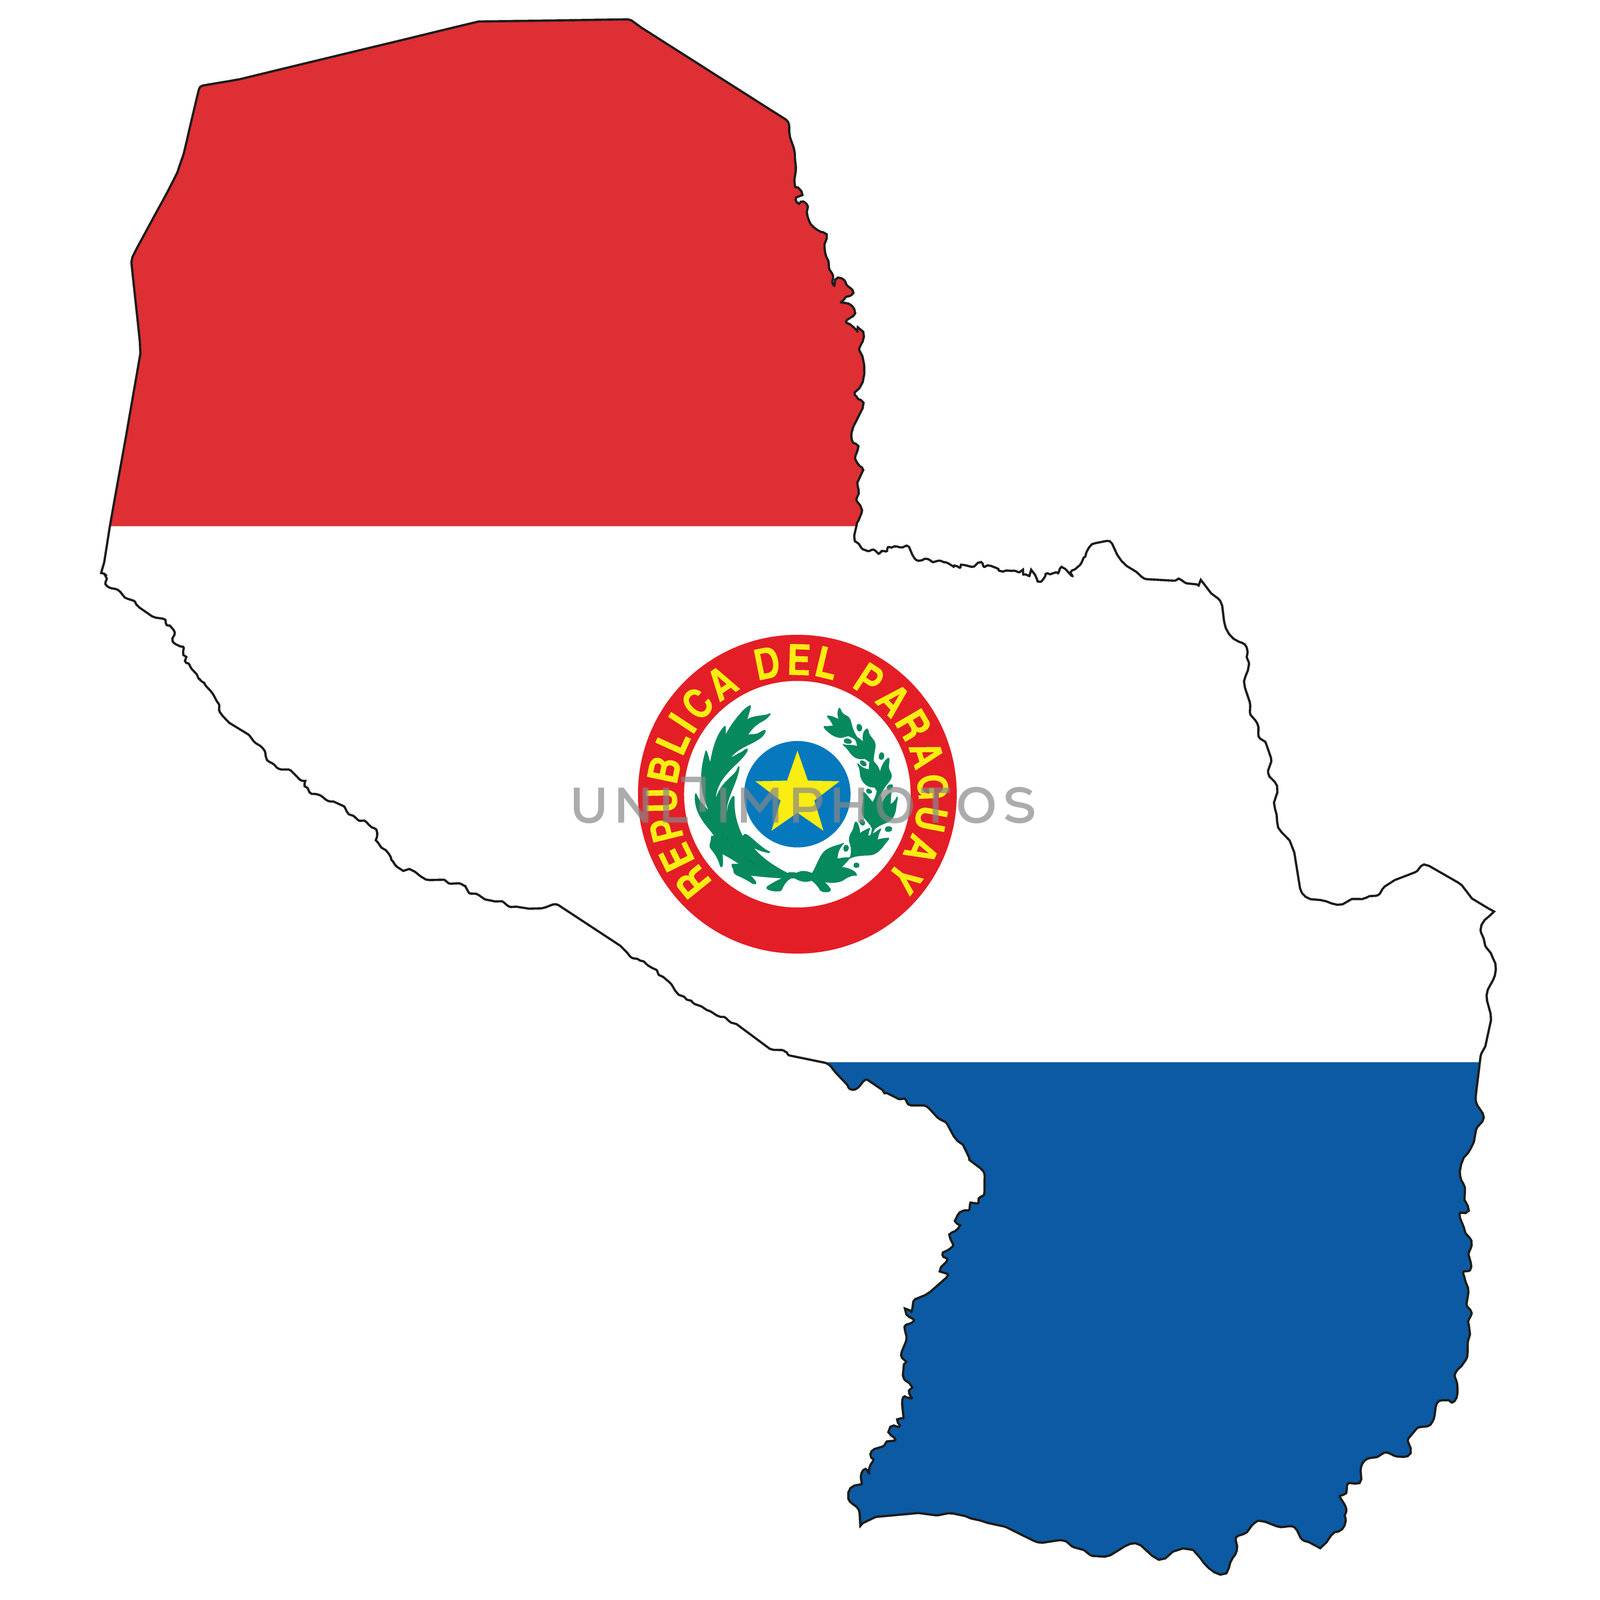 Country outline with the flag of Paraguay in it